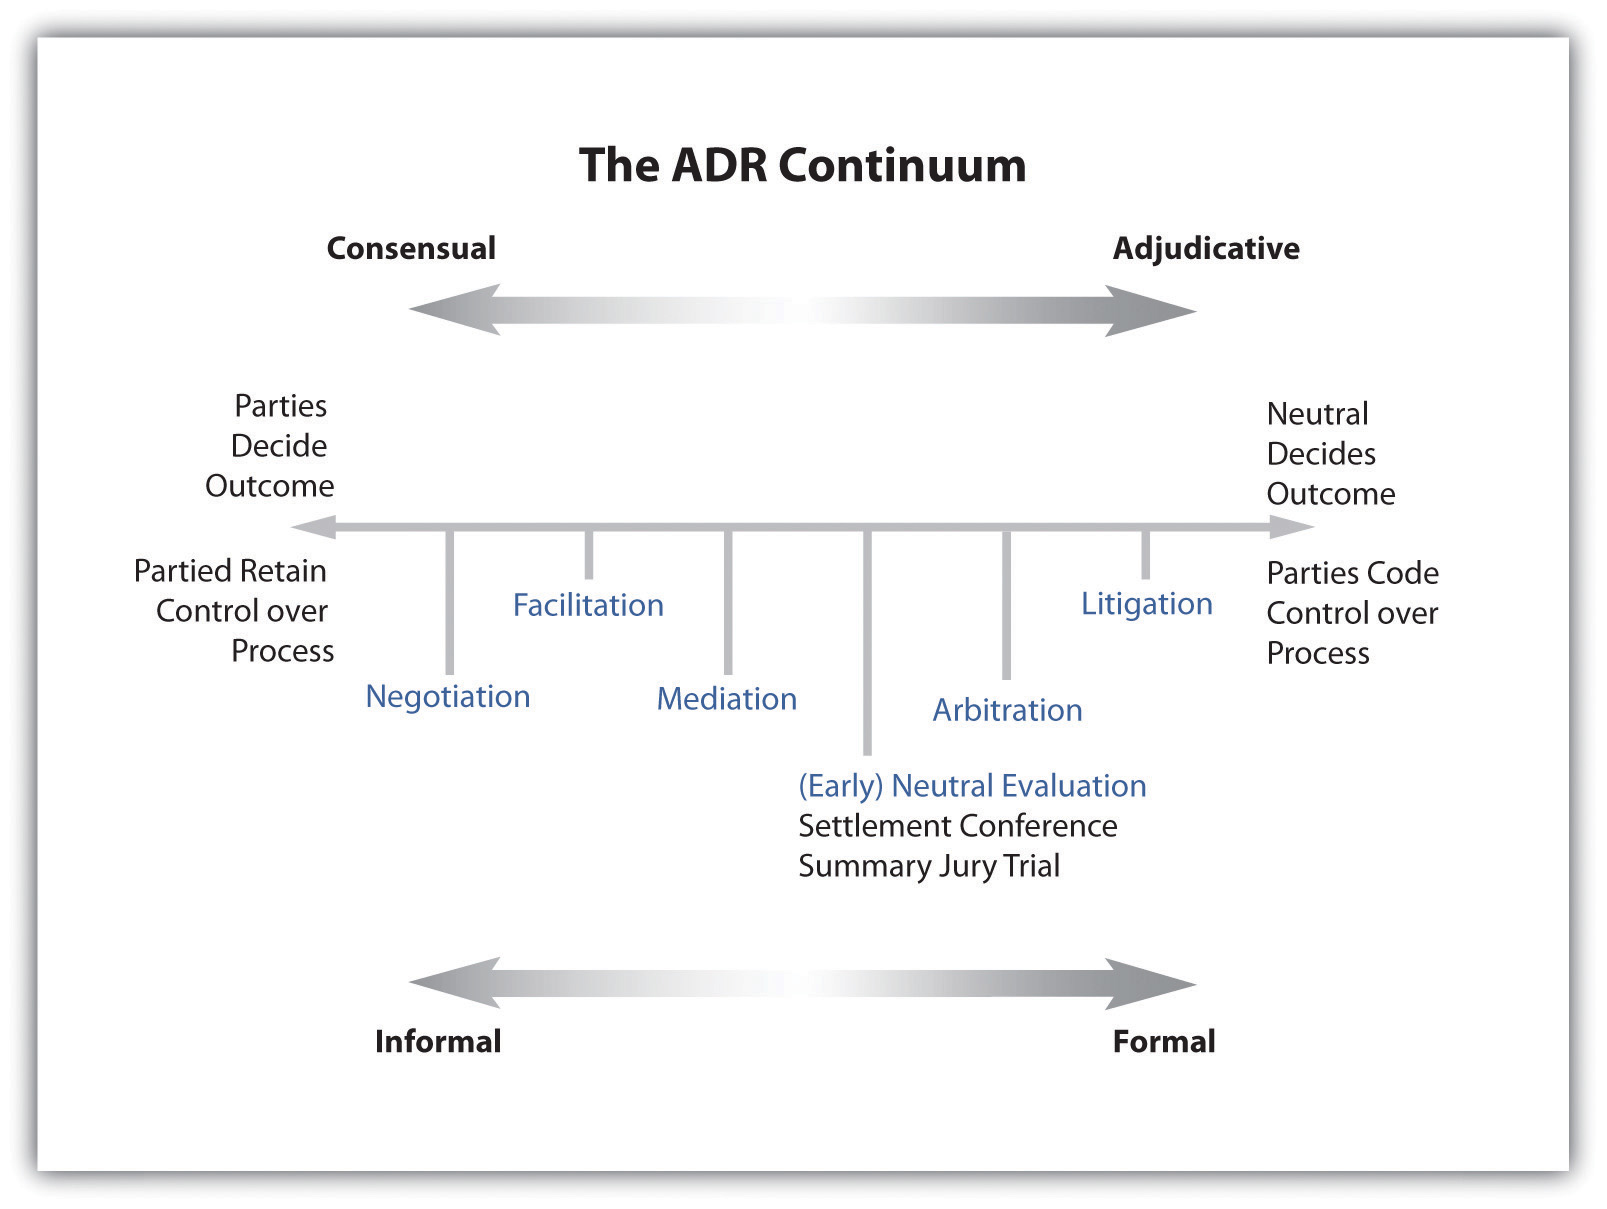 The ADR Continuum from consensual to adjudicative and informal to formal.